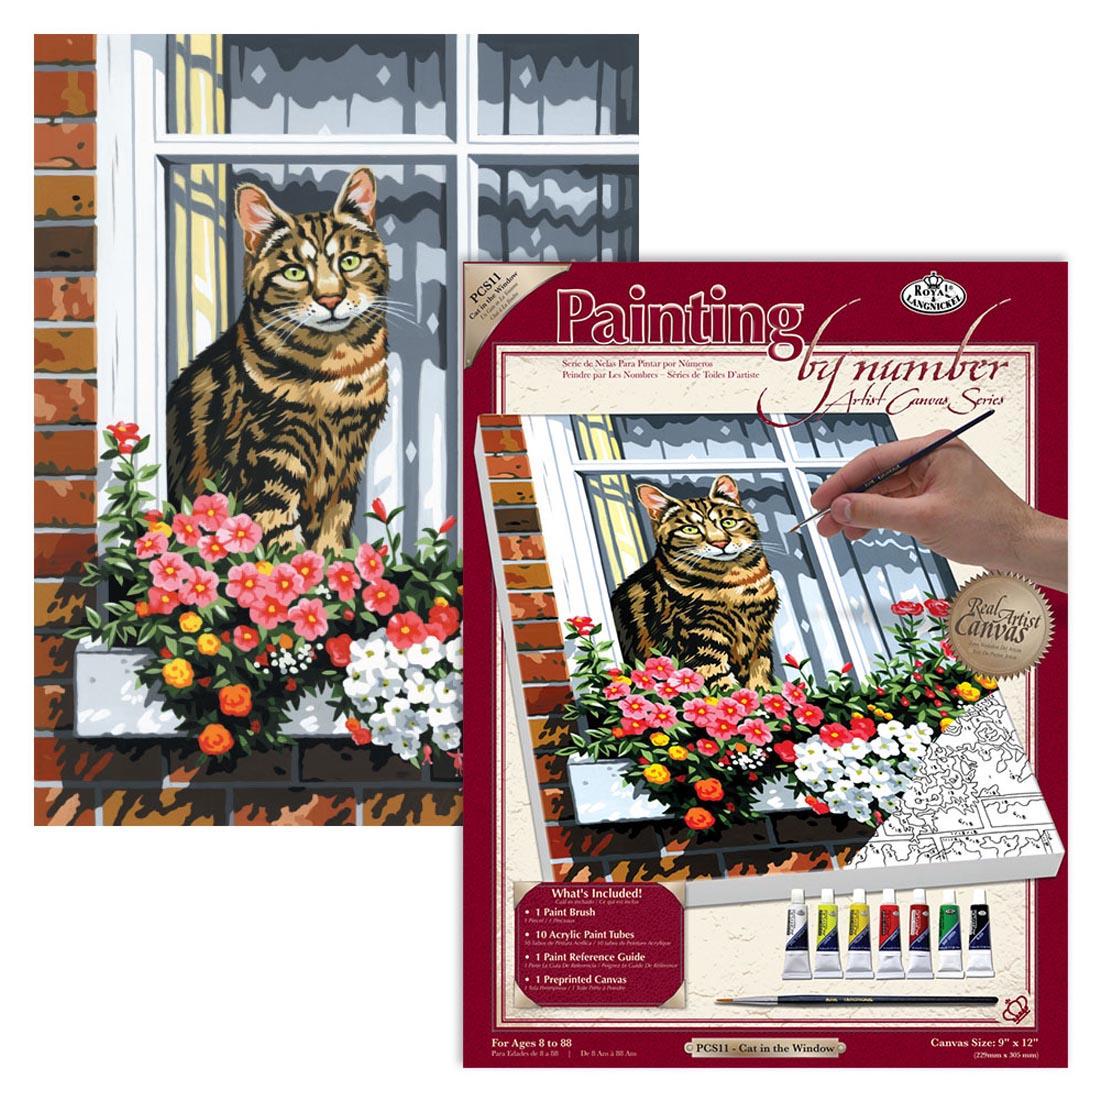 Royal & Langnickel Painting By Number Artist Canvas Series: Cat In The Window package with the completed painting behind it